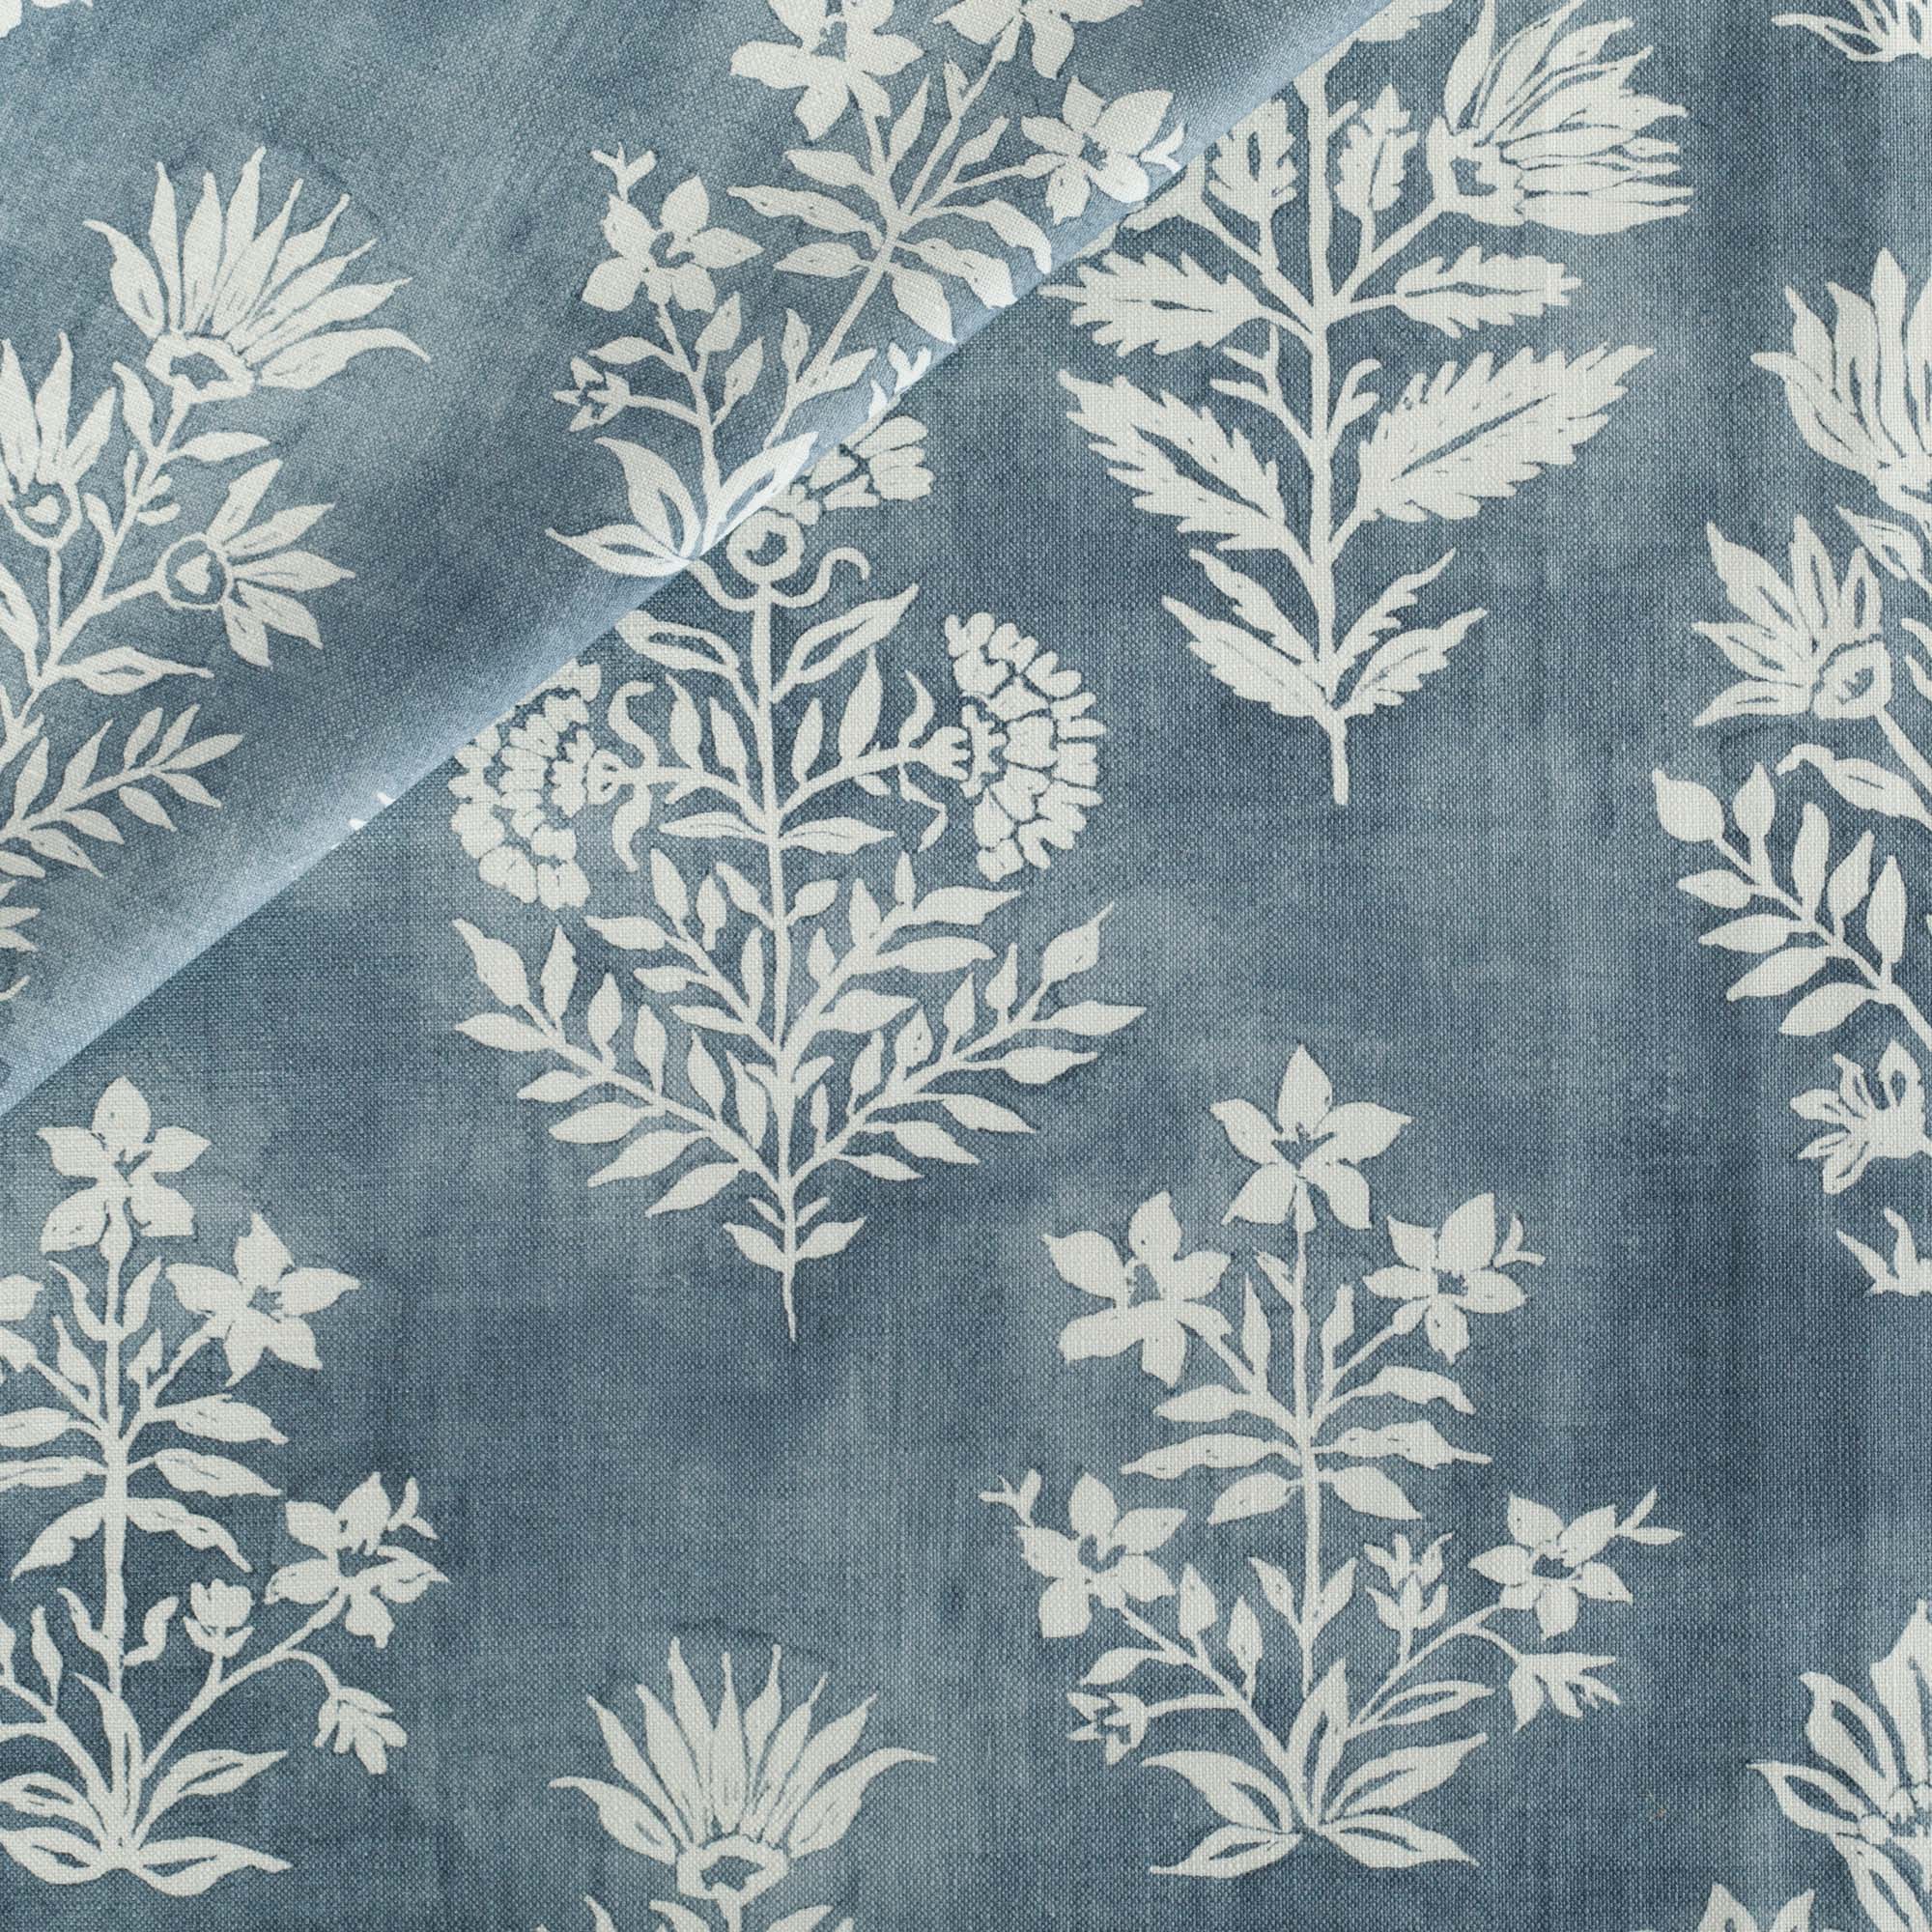 an indigo blue and white floral print fabric : close up view 3